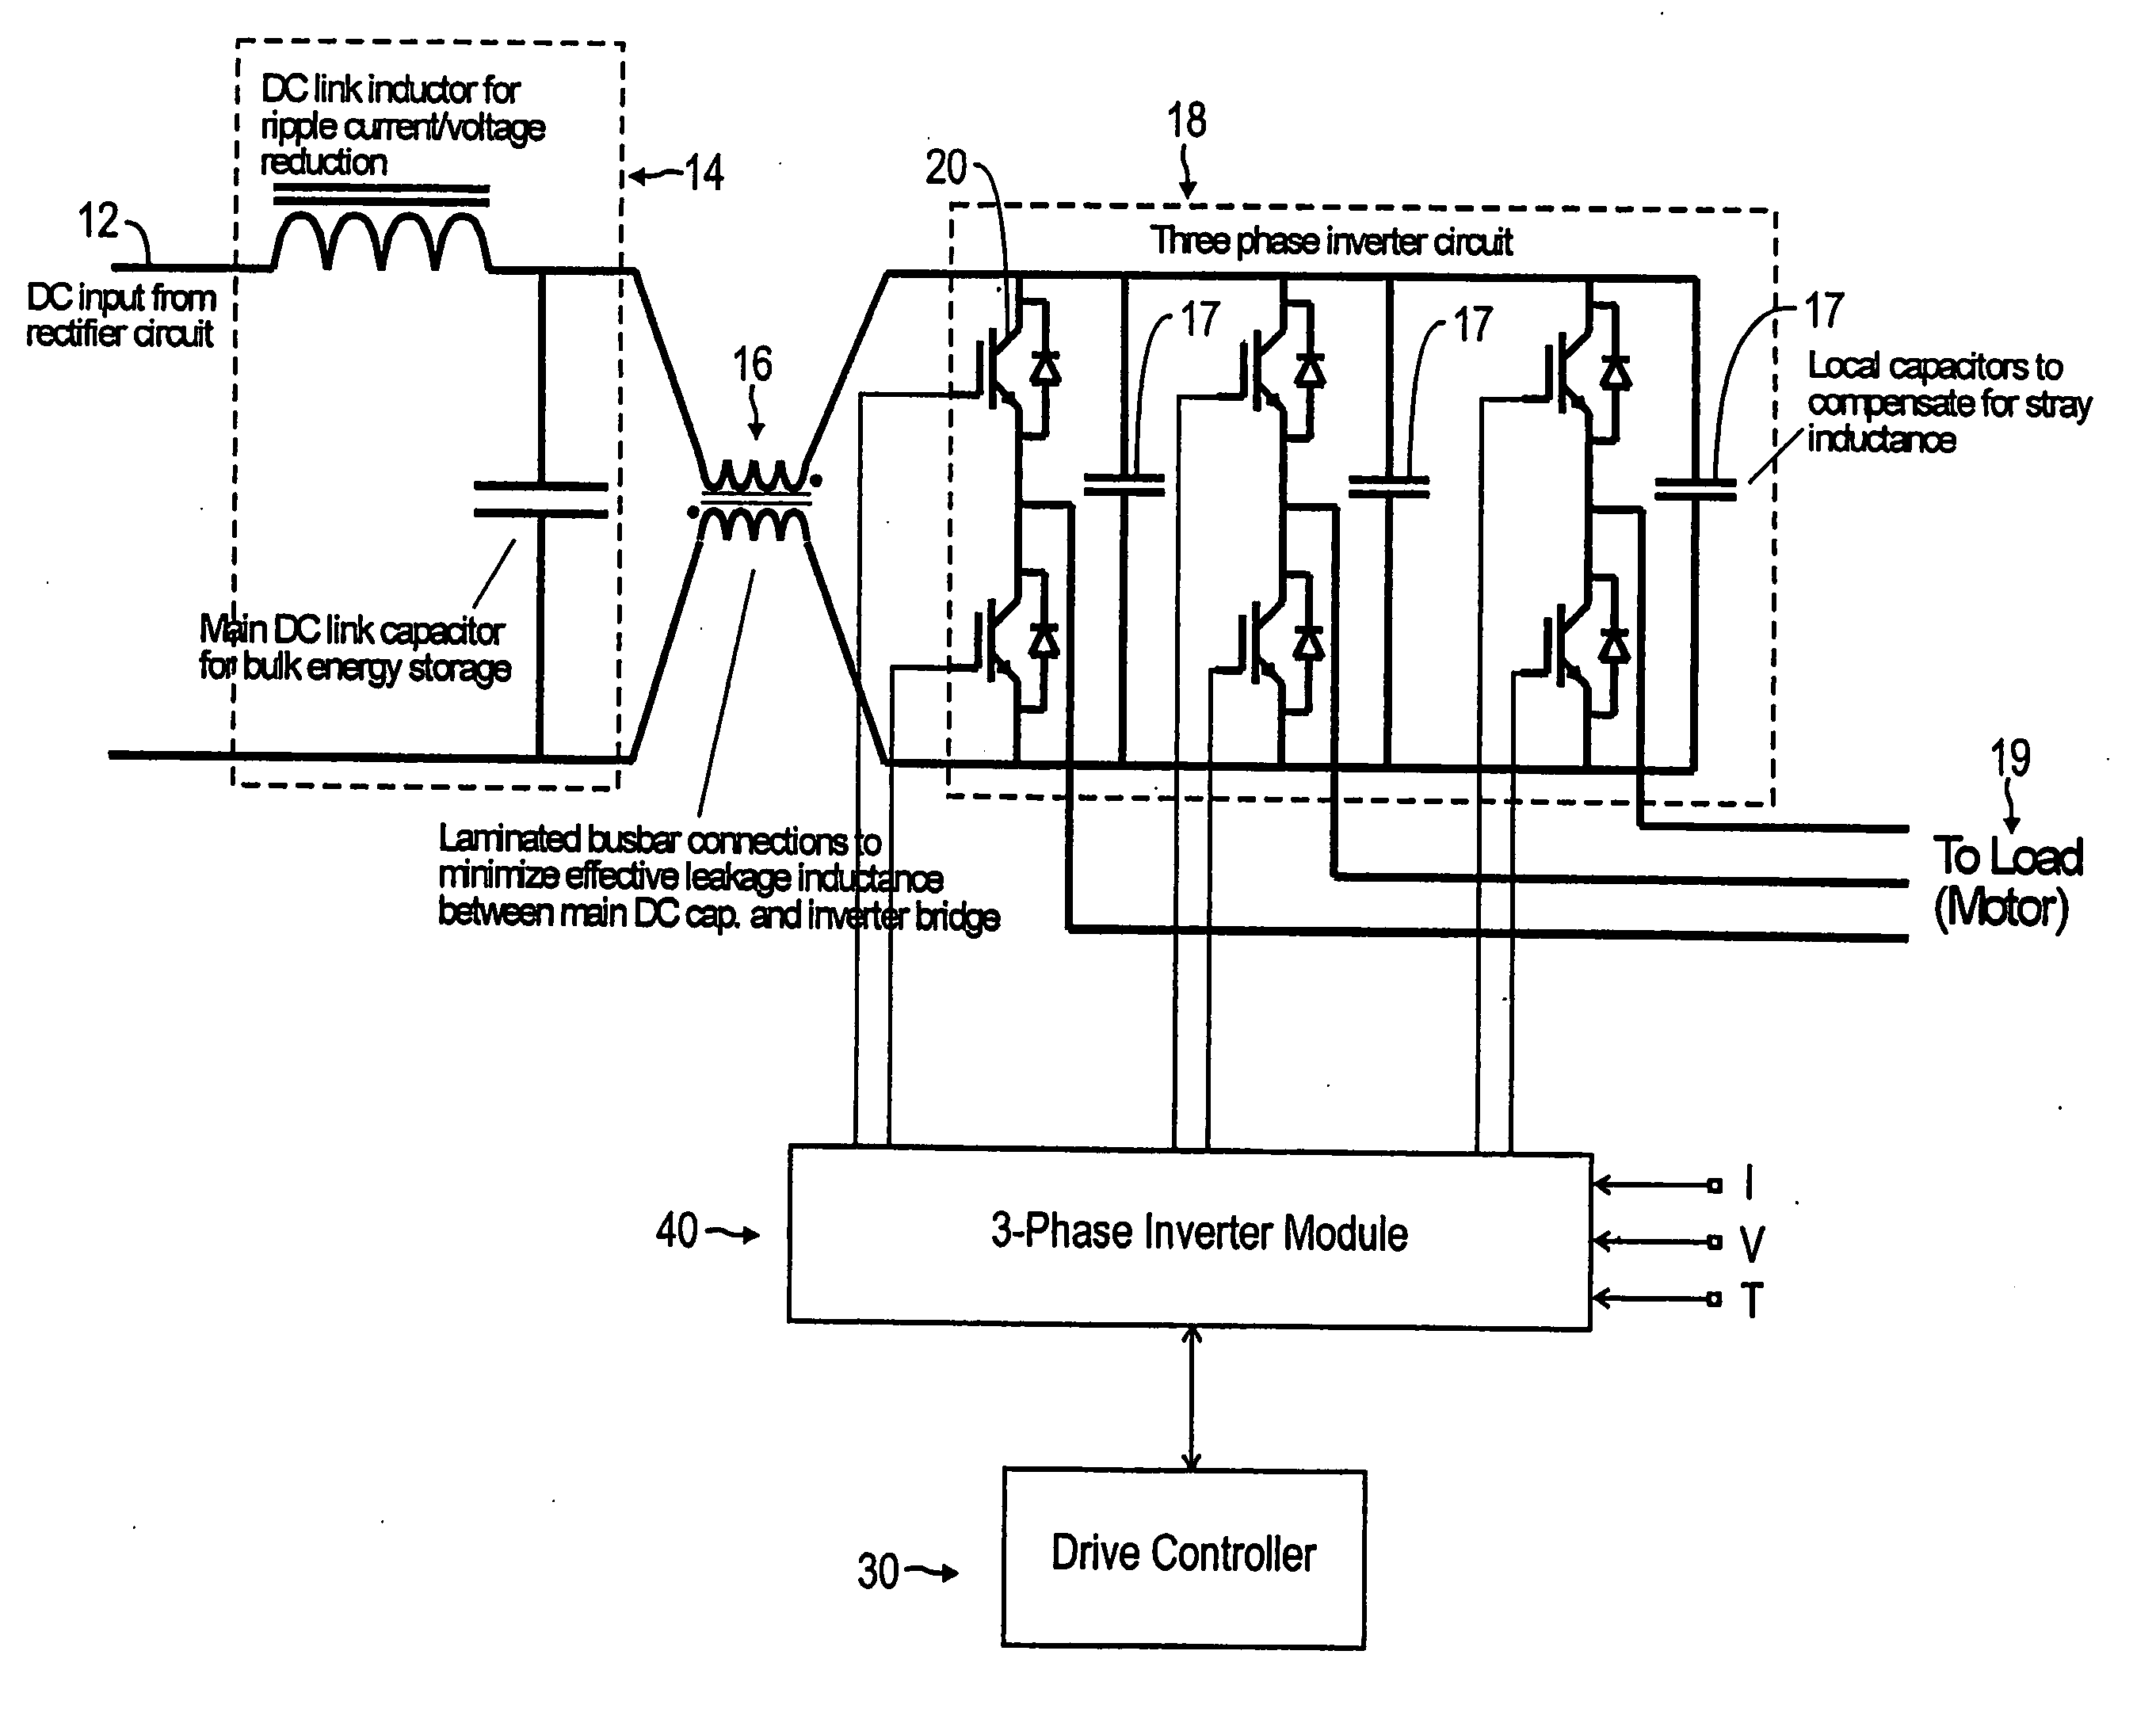 Adaptive gate drive for switching devices of inverter